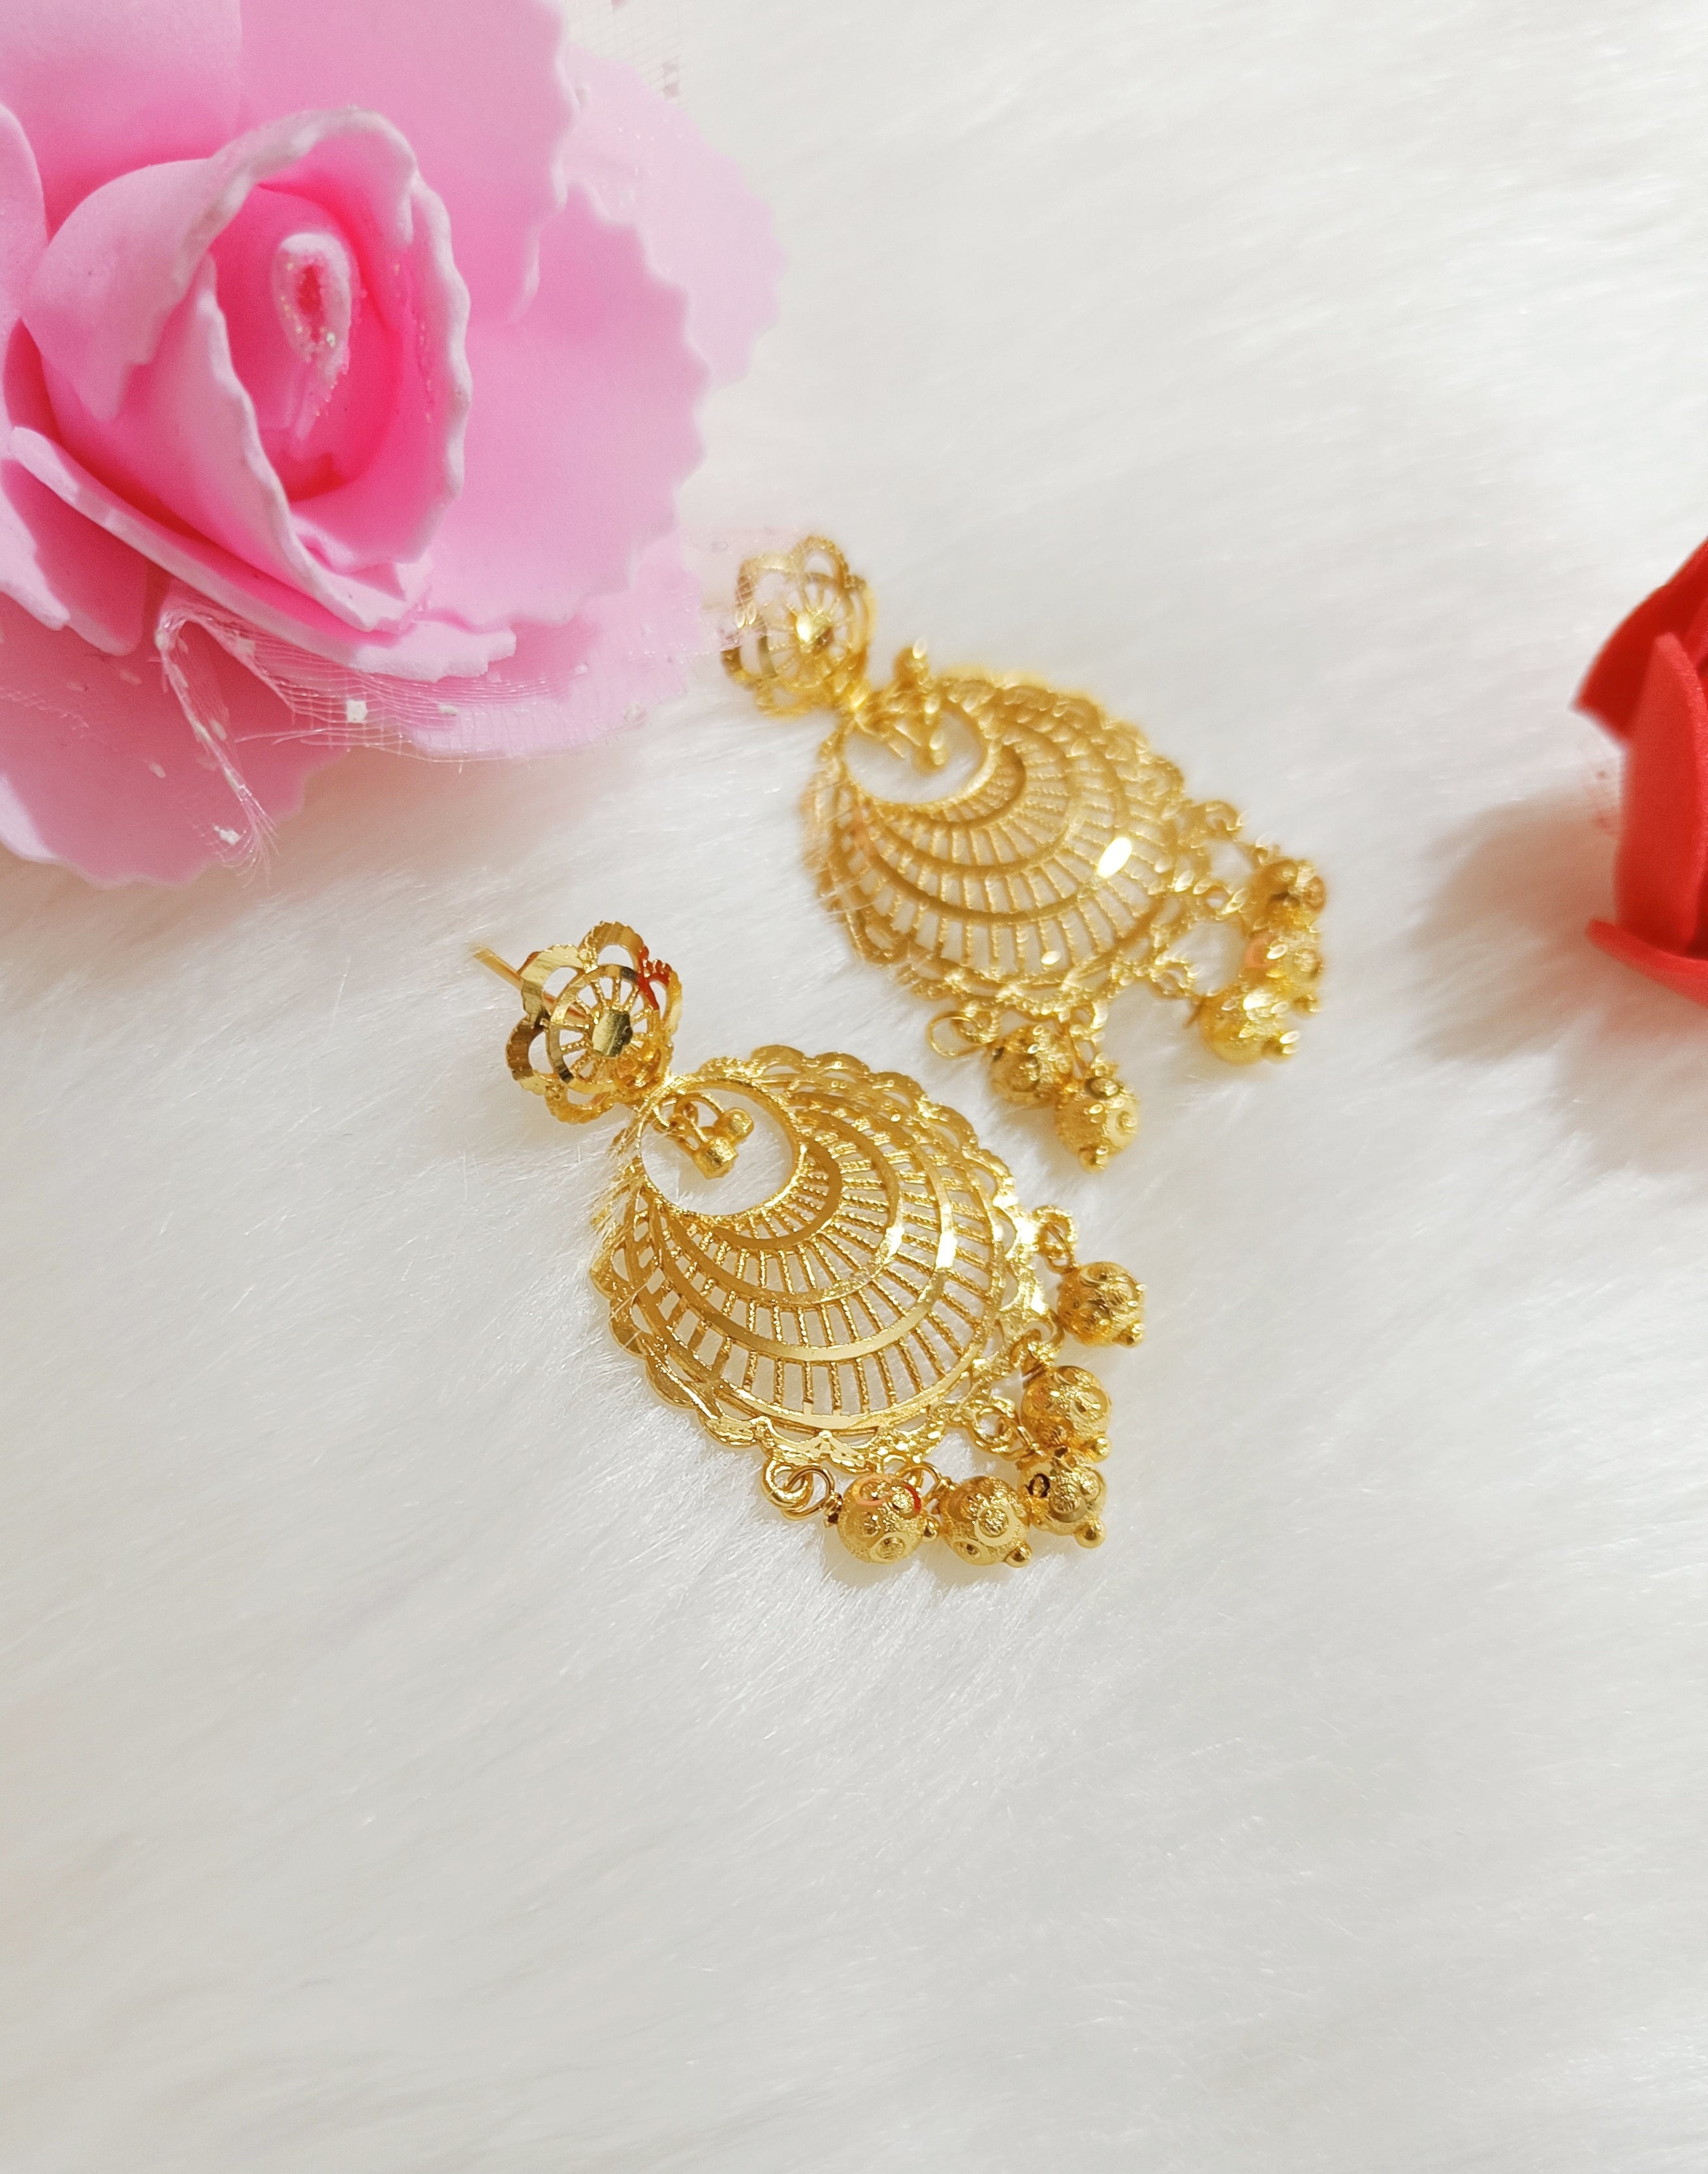 Gold Necklace Designs in 10 Grams - 10 Latest and Traditional Models | Gold  necklace designs, Gold jewellery design necklaces, Gold earrings designs